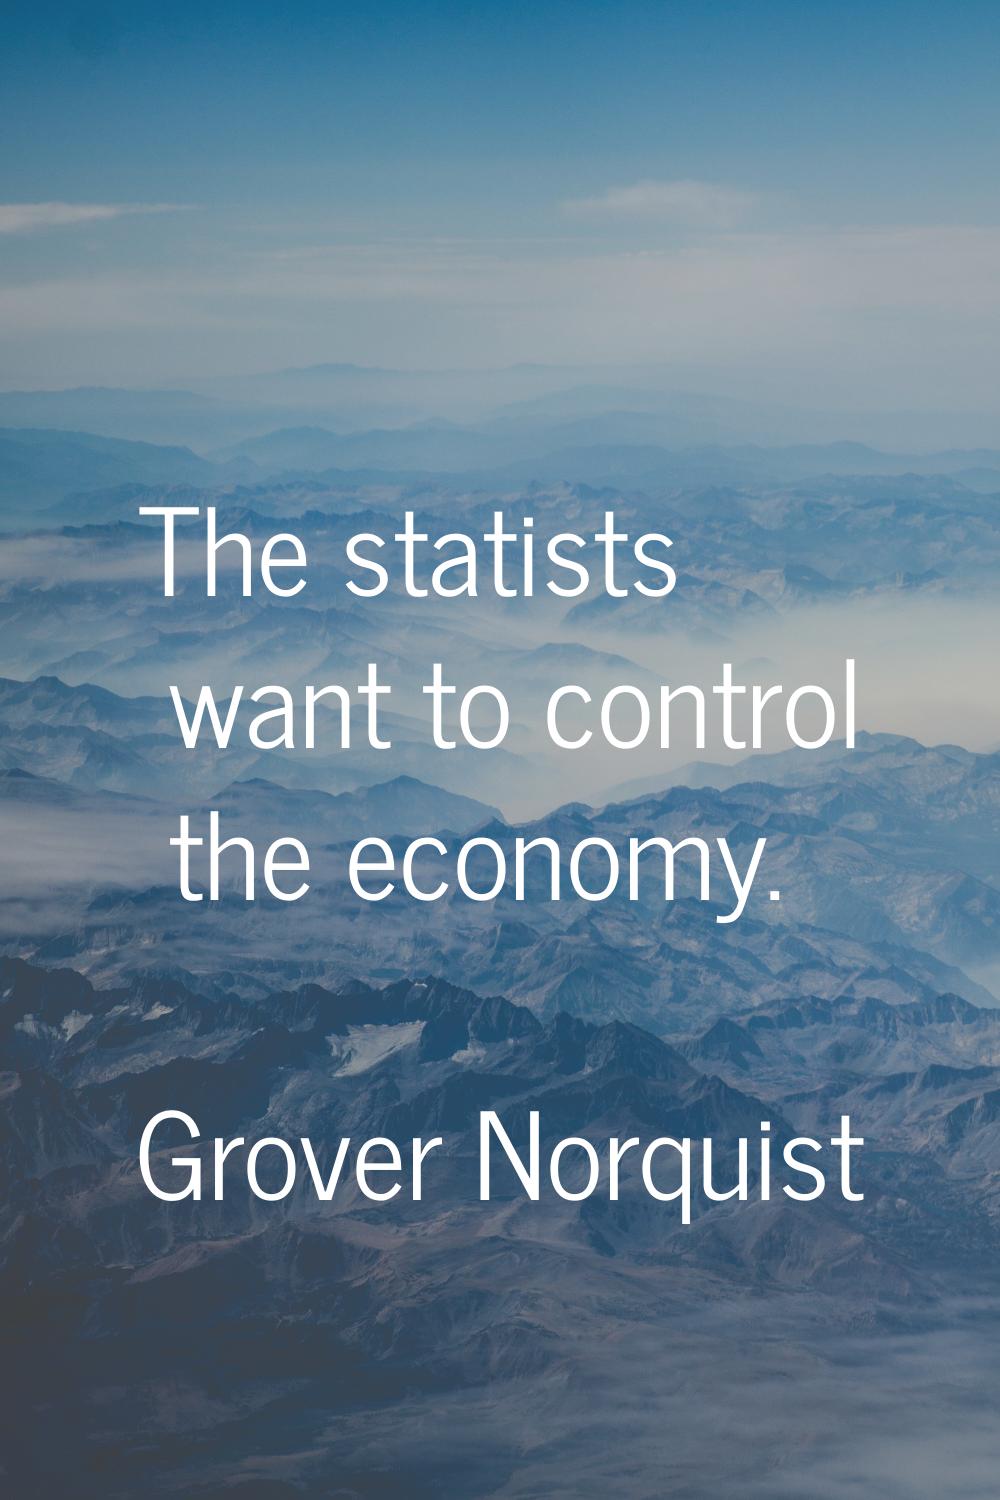 The statists want to control the economy.